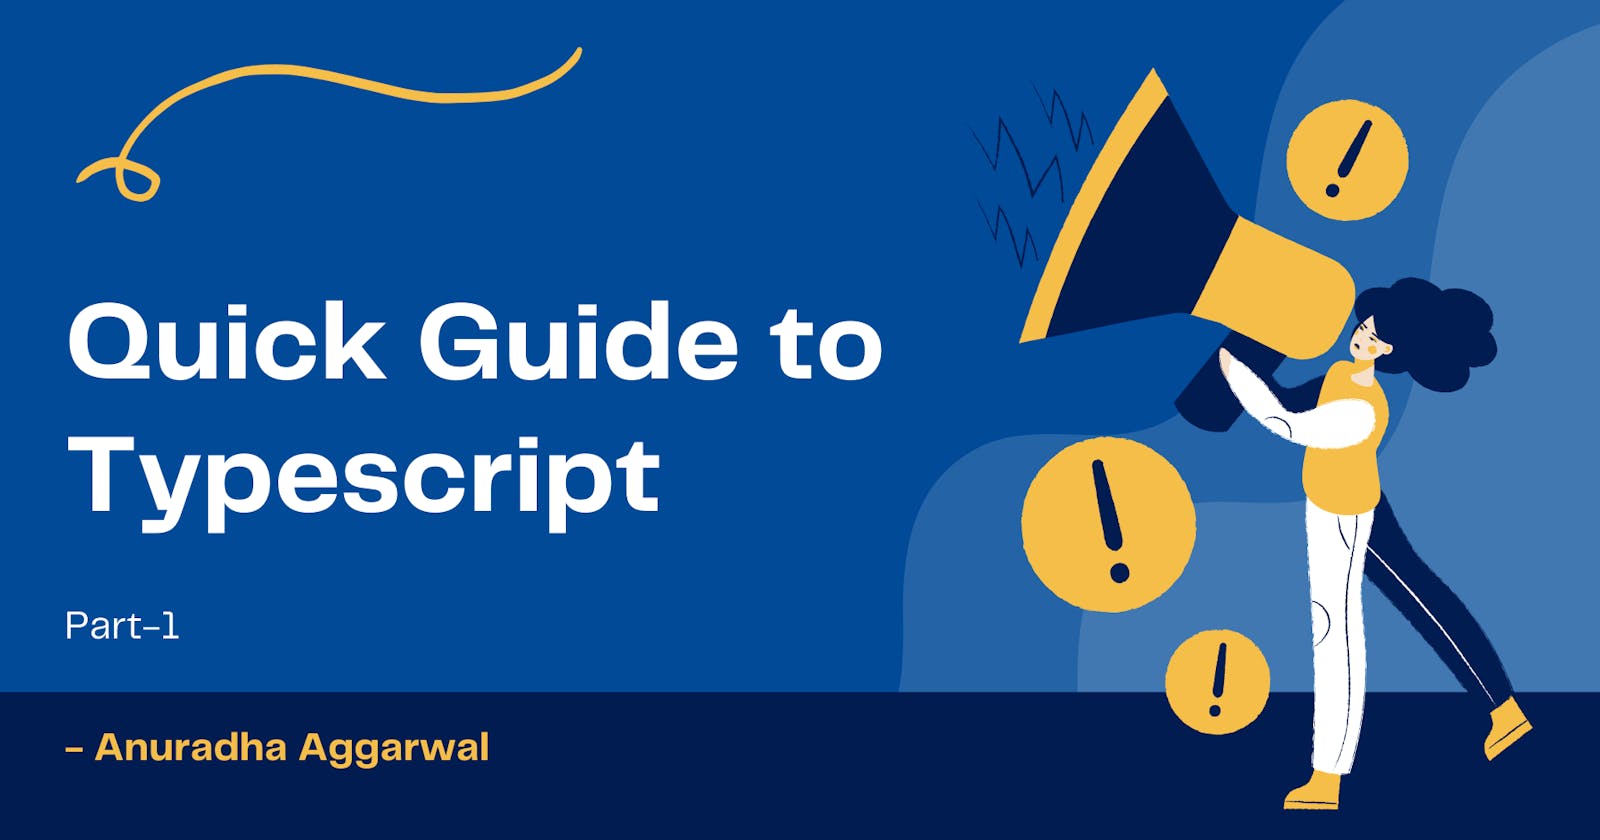 Quick Guide to Typescript - Part 1